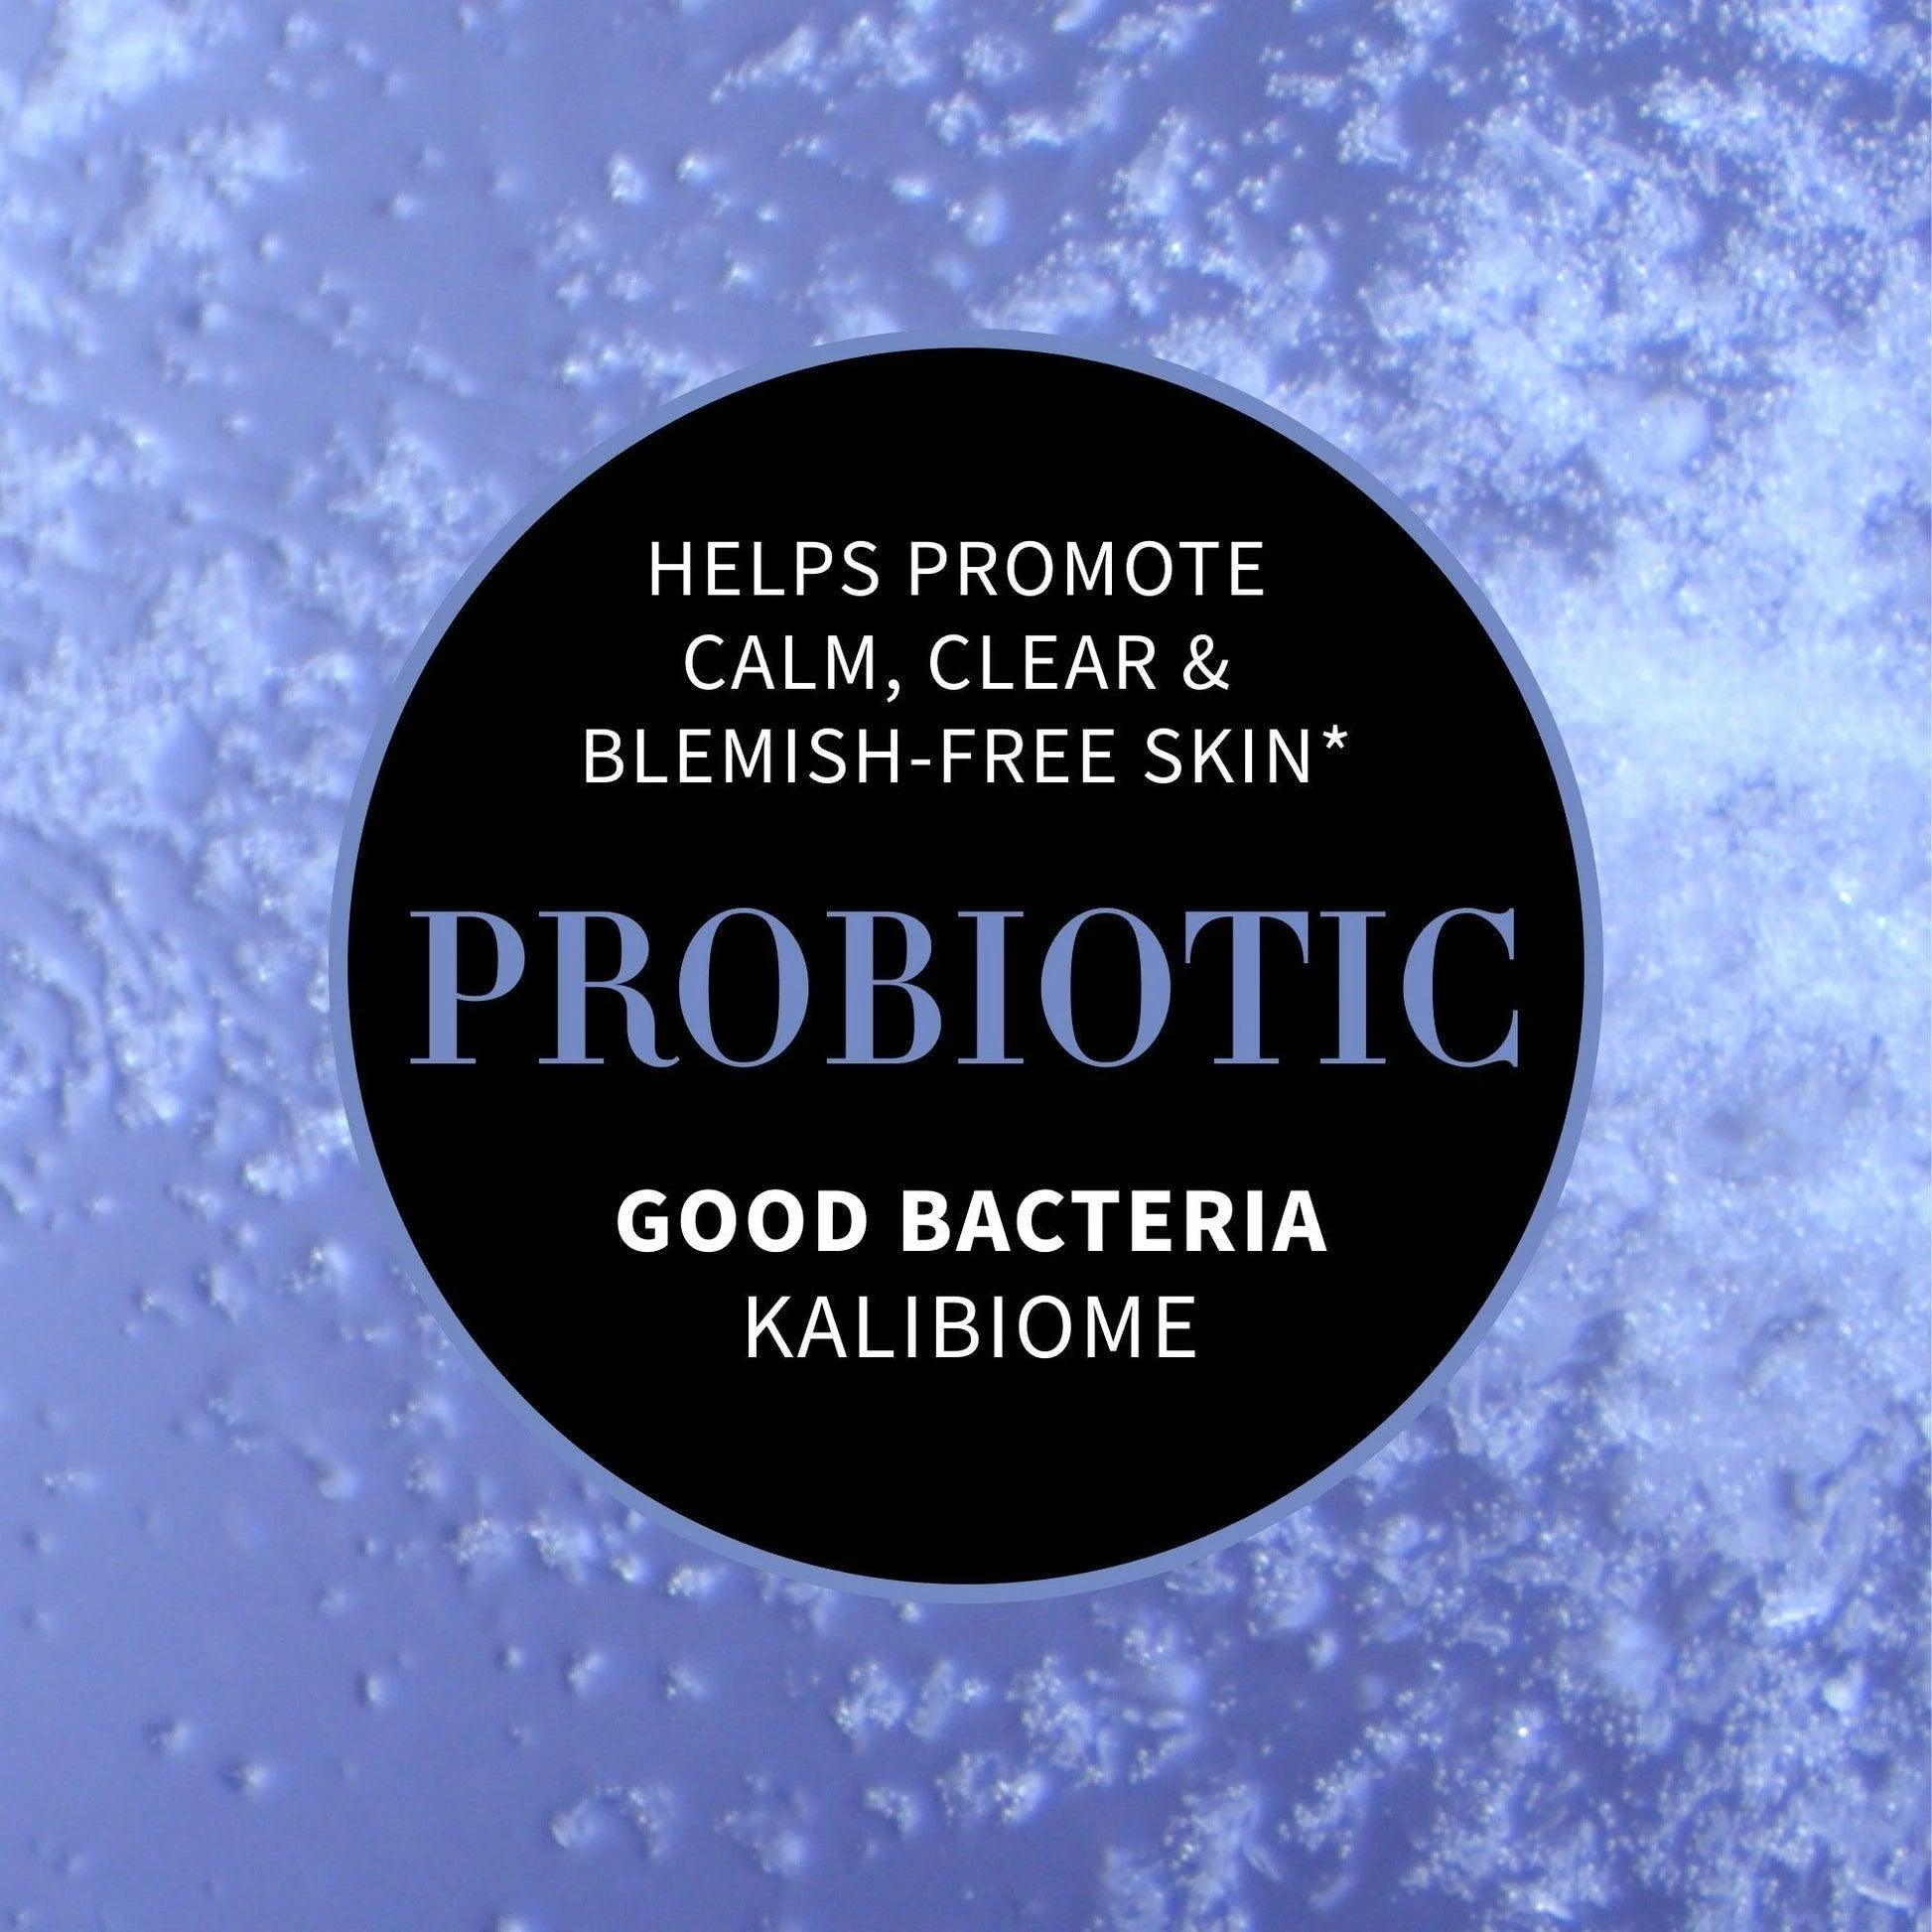 Antipodes Culture Probiotic Night Recovery Water Cream 60ml by Love Nature